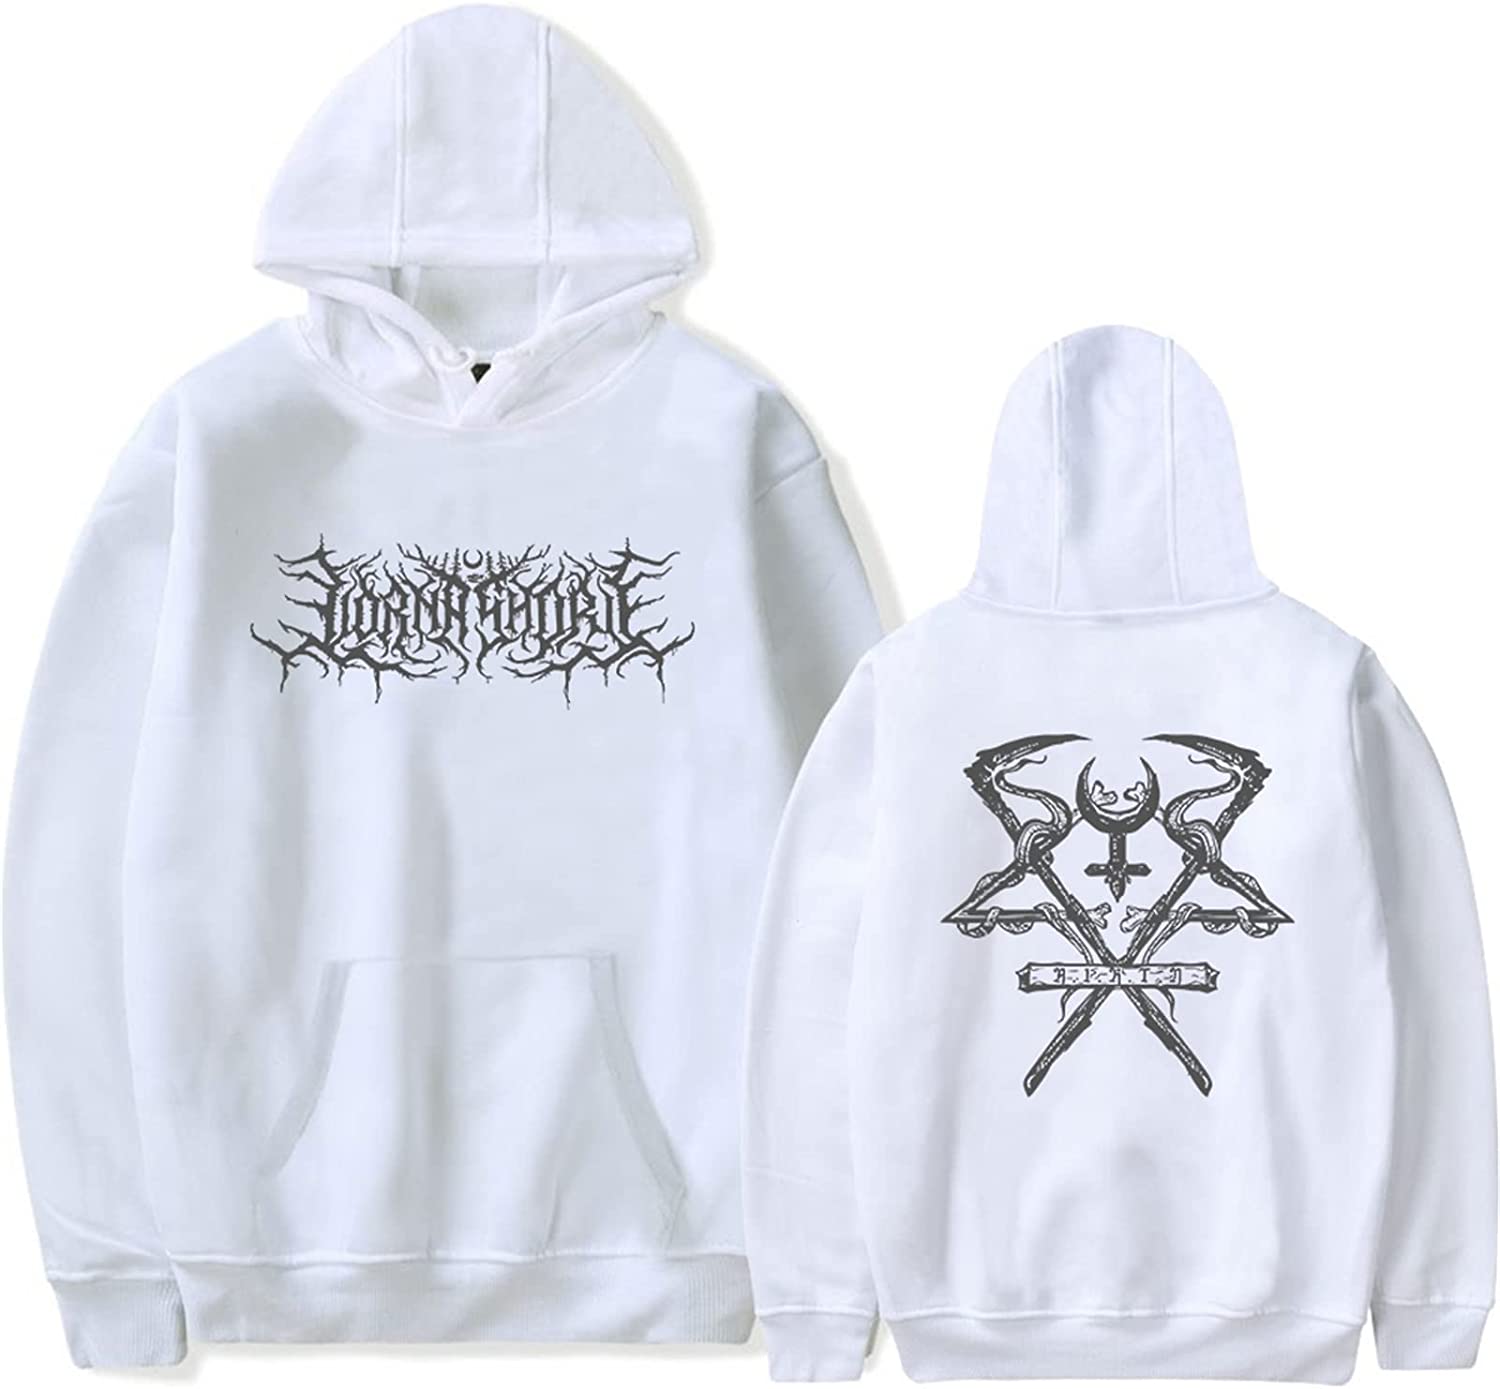 Lorna Shore Hoodies – Logo Printed Front Pullover Colorful Hoodie 3 - Lorna Shore Store